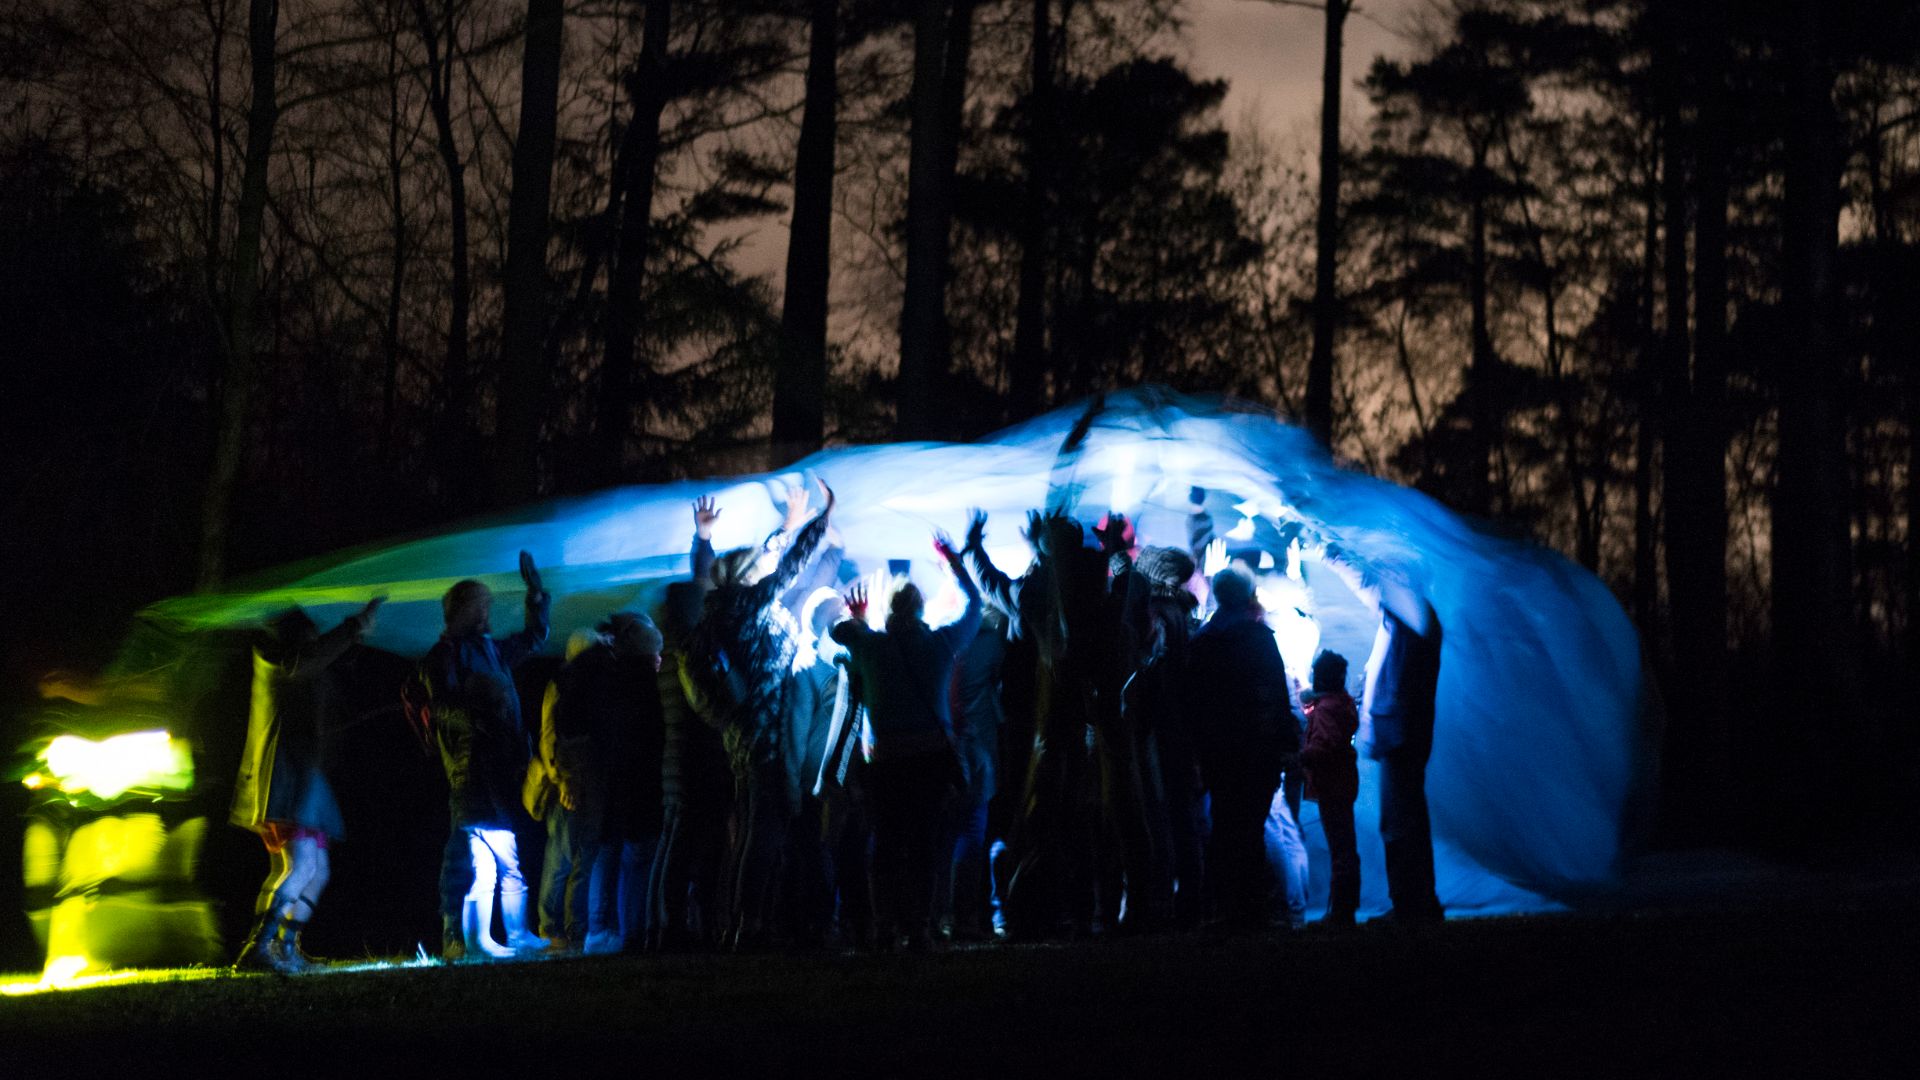 An illuminated blue parachute covering the audience in the forest at night.